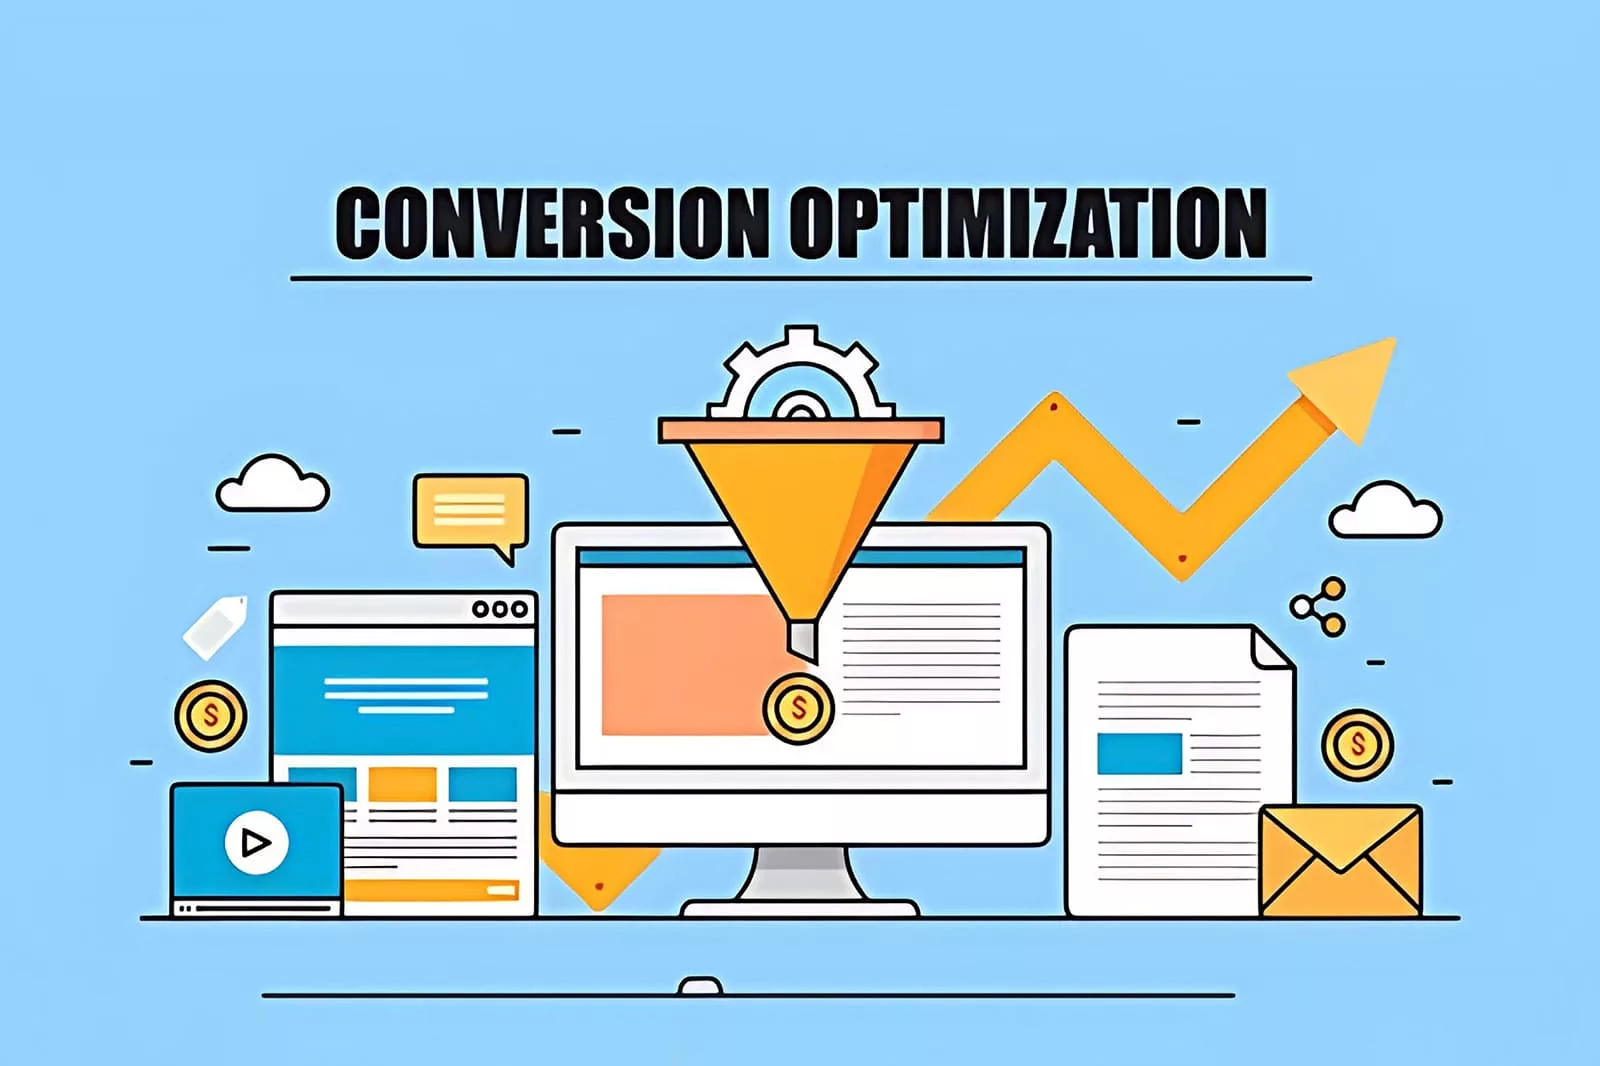 How to increase the conversion rate for my website